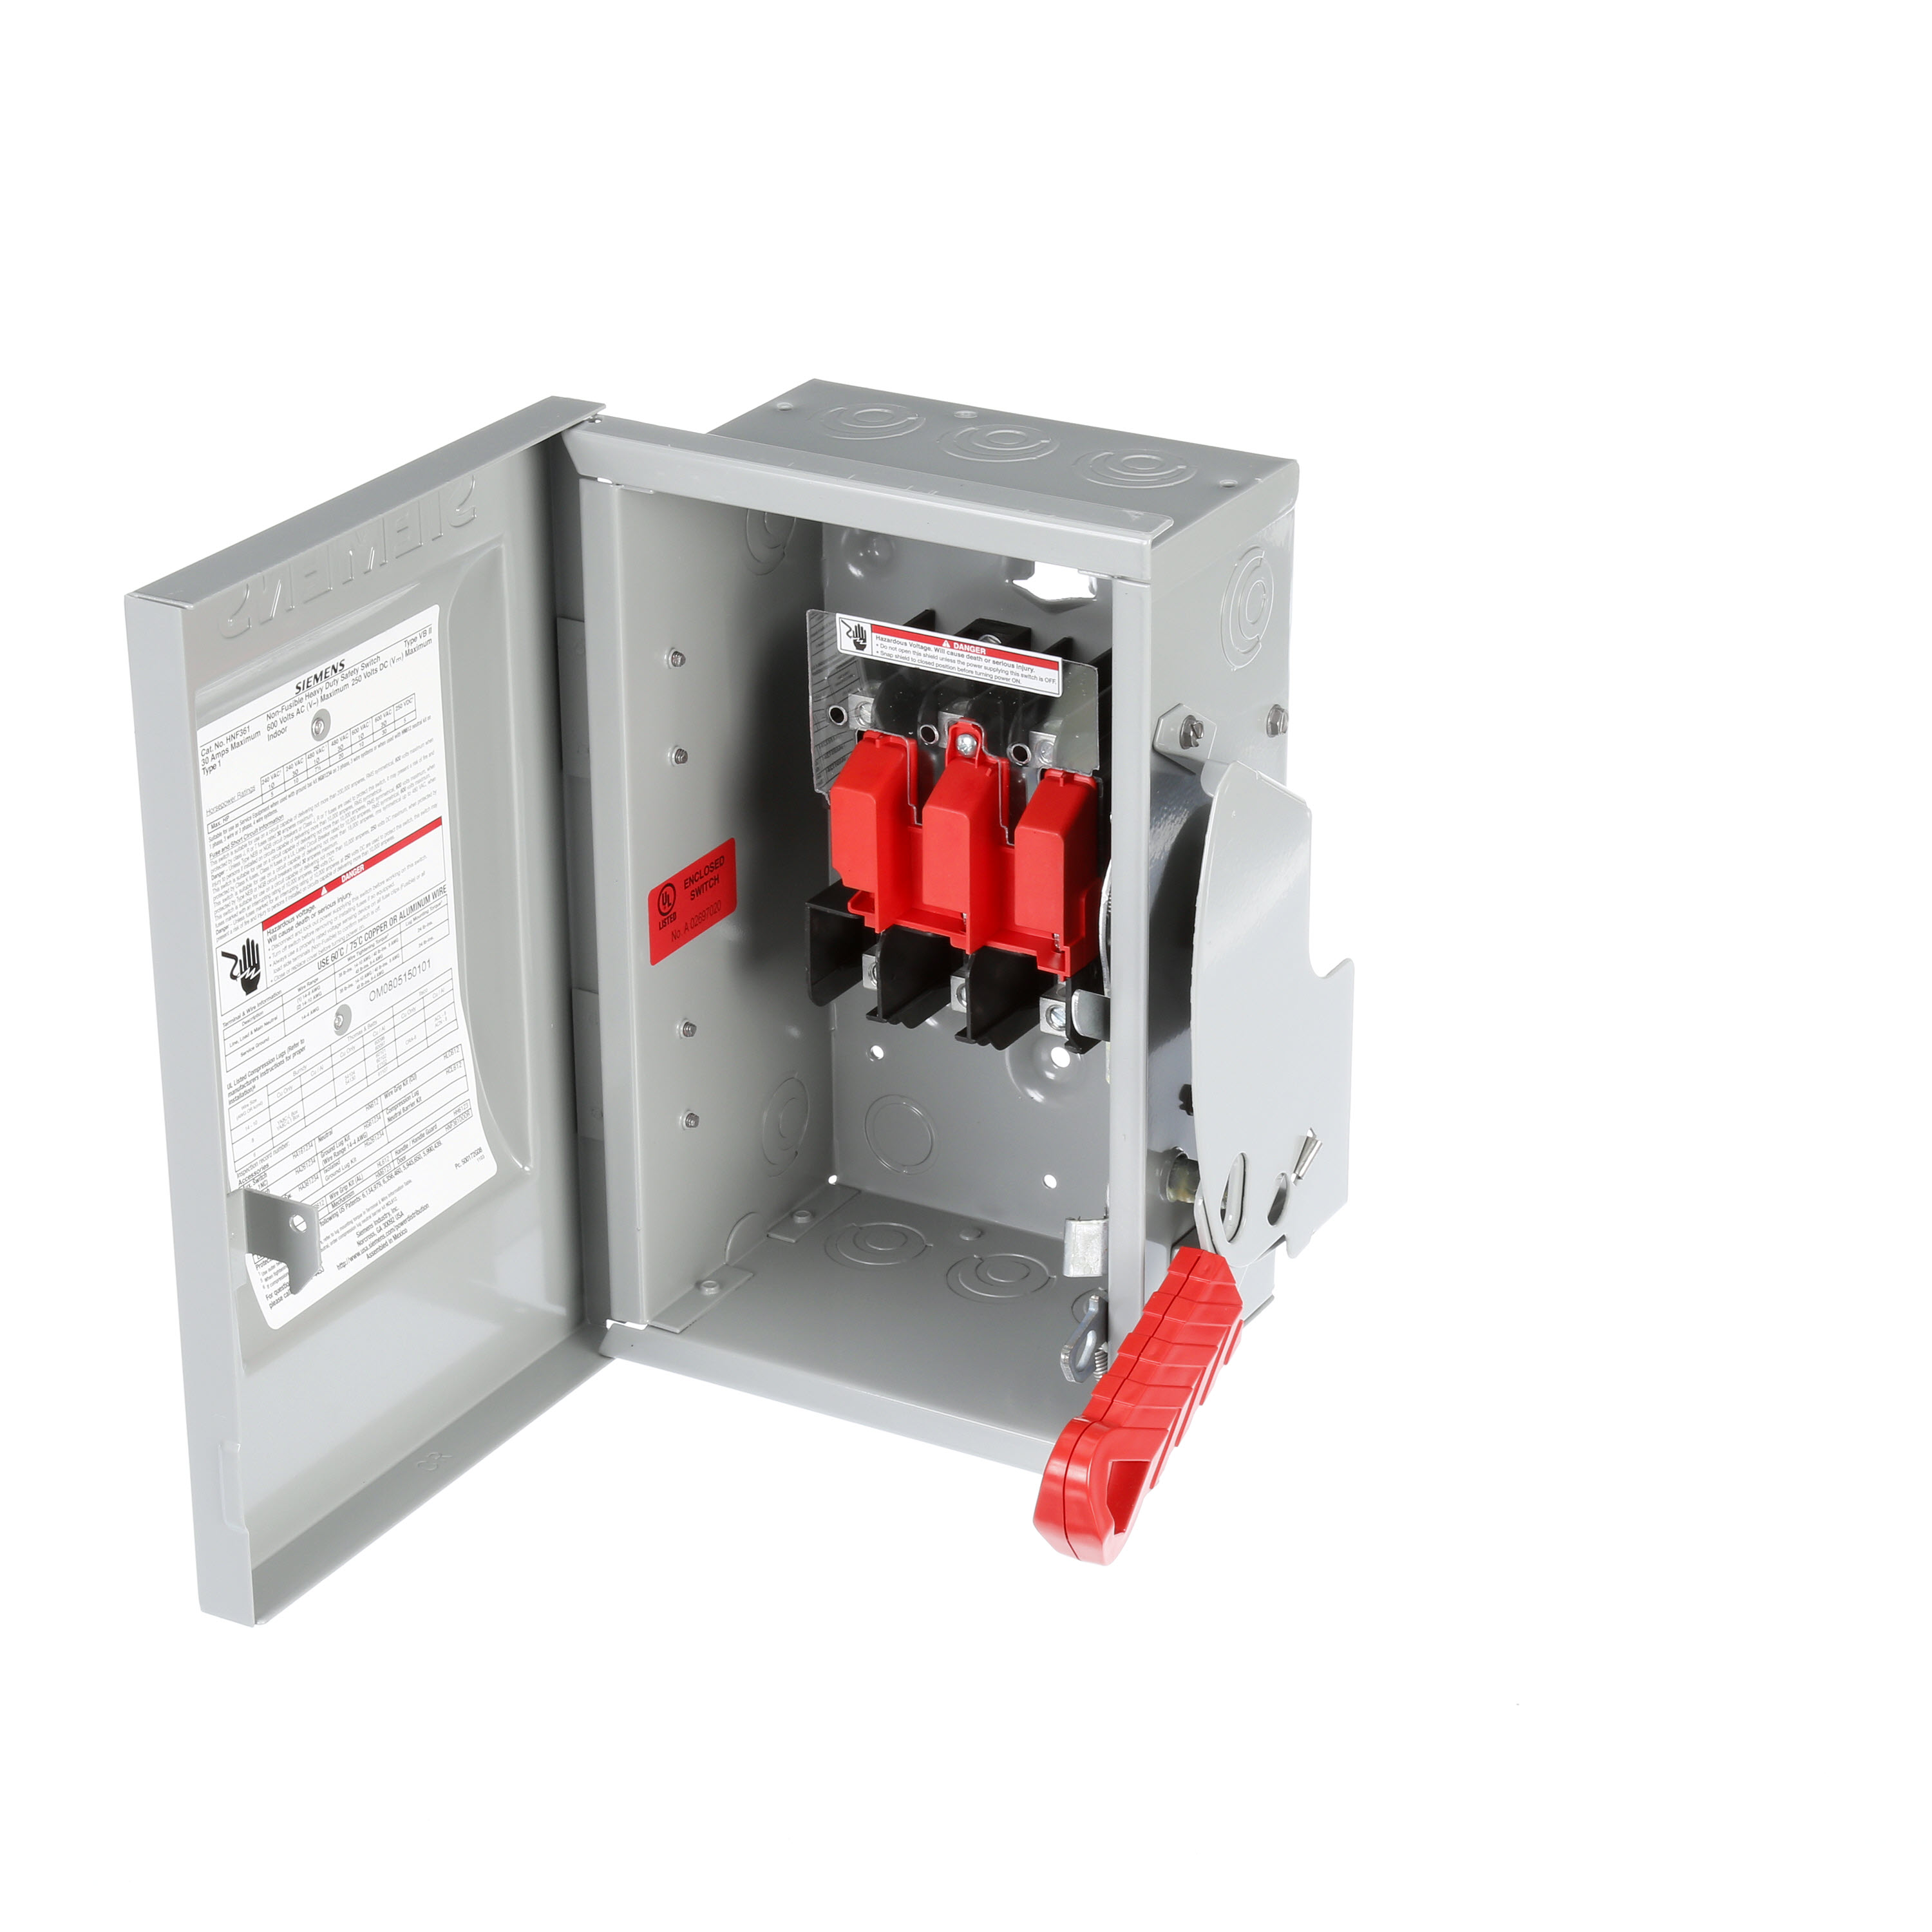 Details about   Siemens HNF361 30A Non-Fusible Heavy Duty Safety Enclosed Switch 600VAC/250VDC 